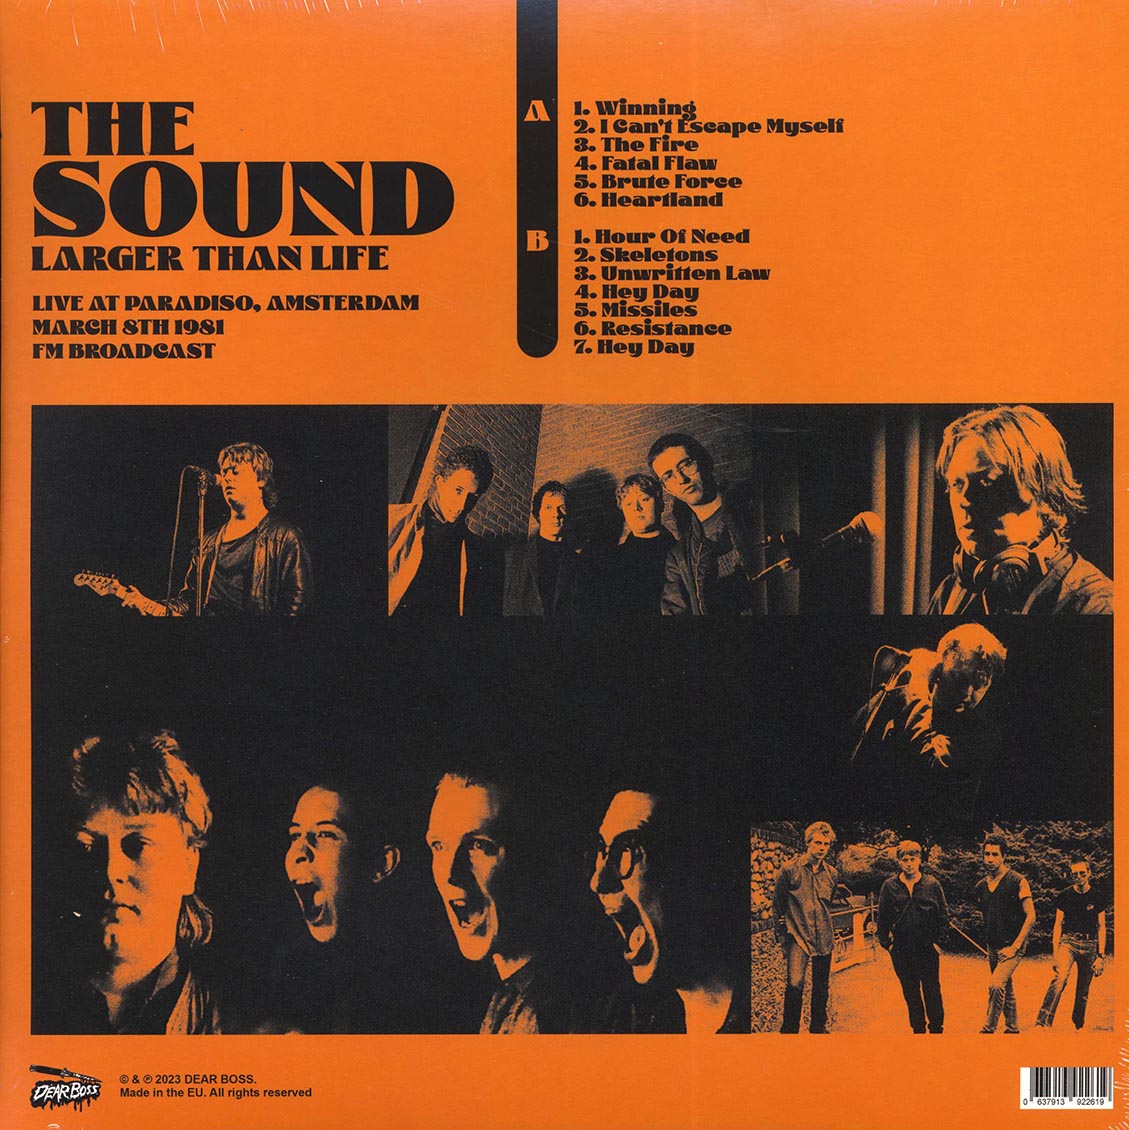 The Sound - Larger Than Life: Live At Paradiso, Amsterdam, March 8, 1981 - Vinyl LP, LP